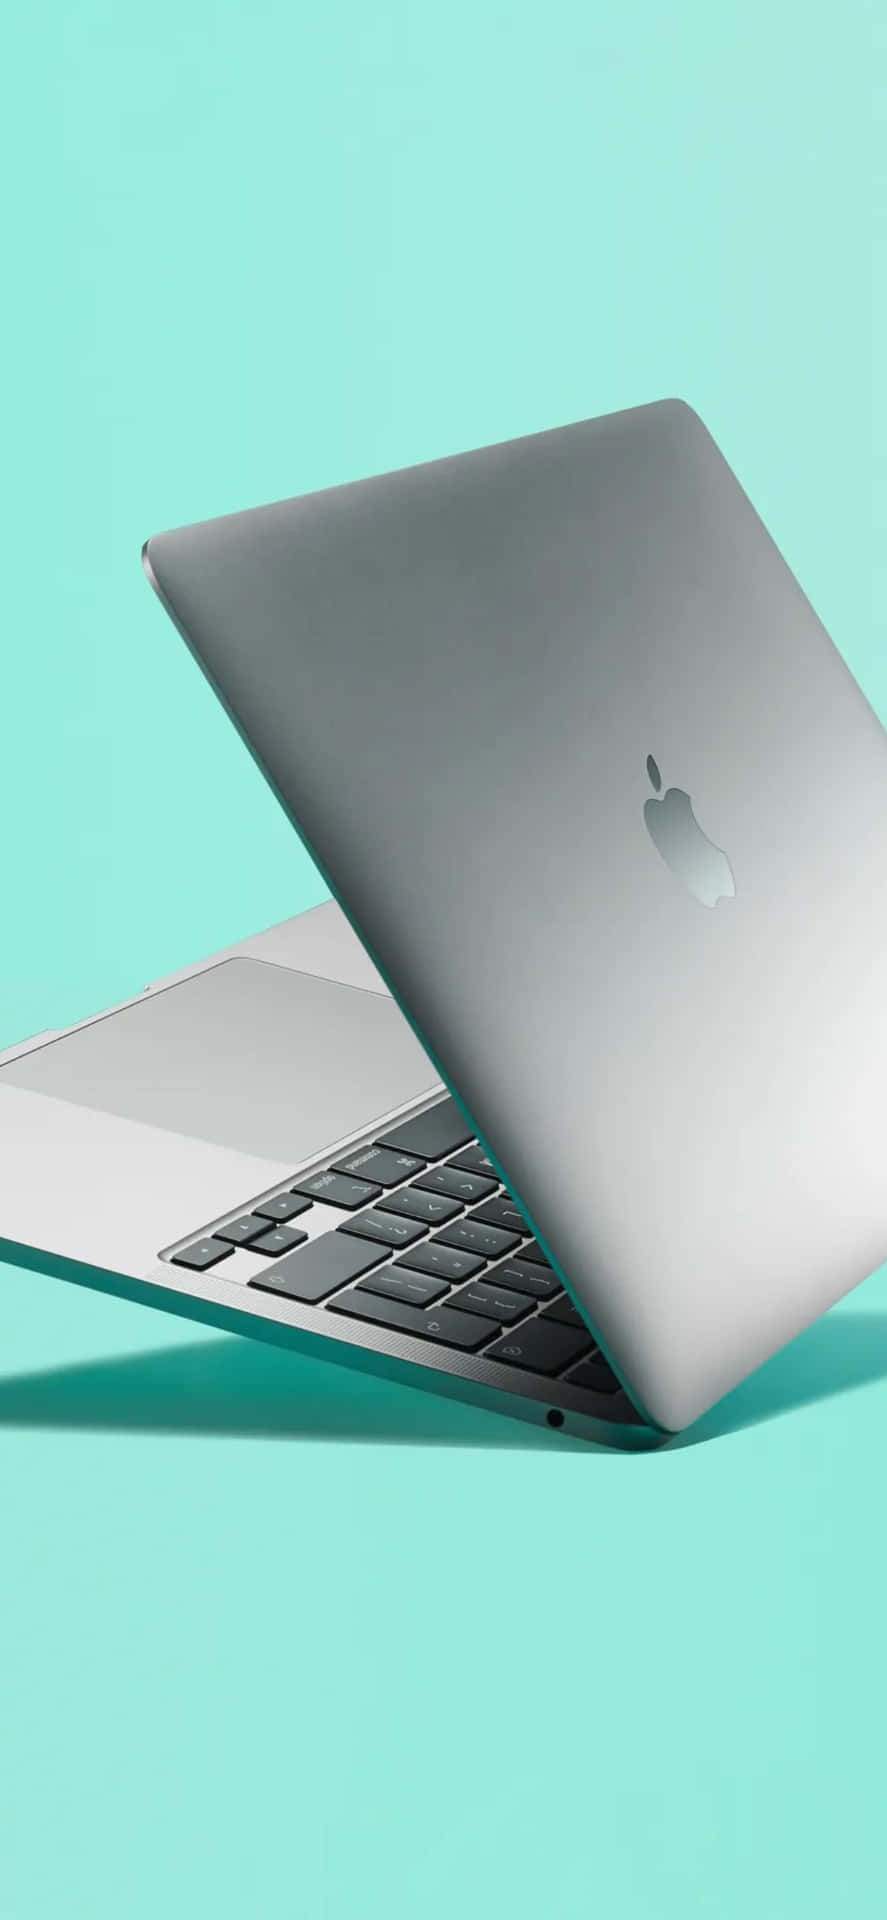 Apple Laptop Iphone Xs Computer Mint Green Background